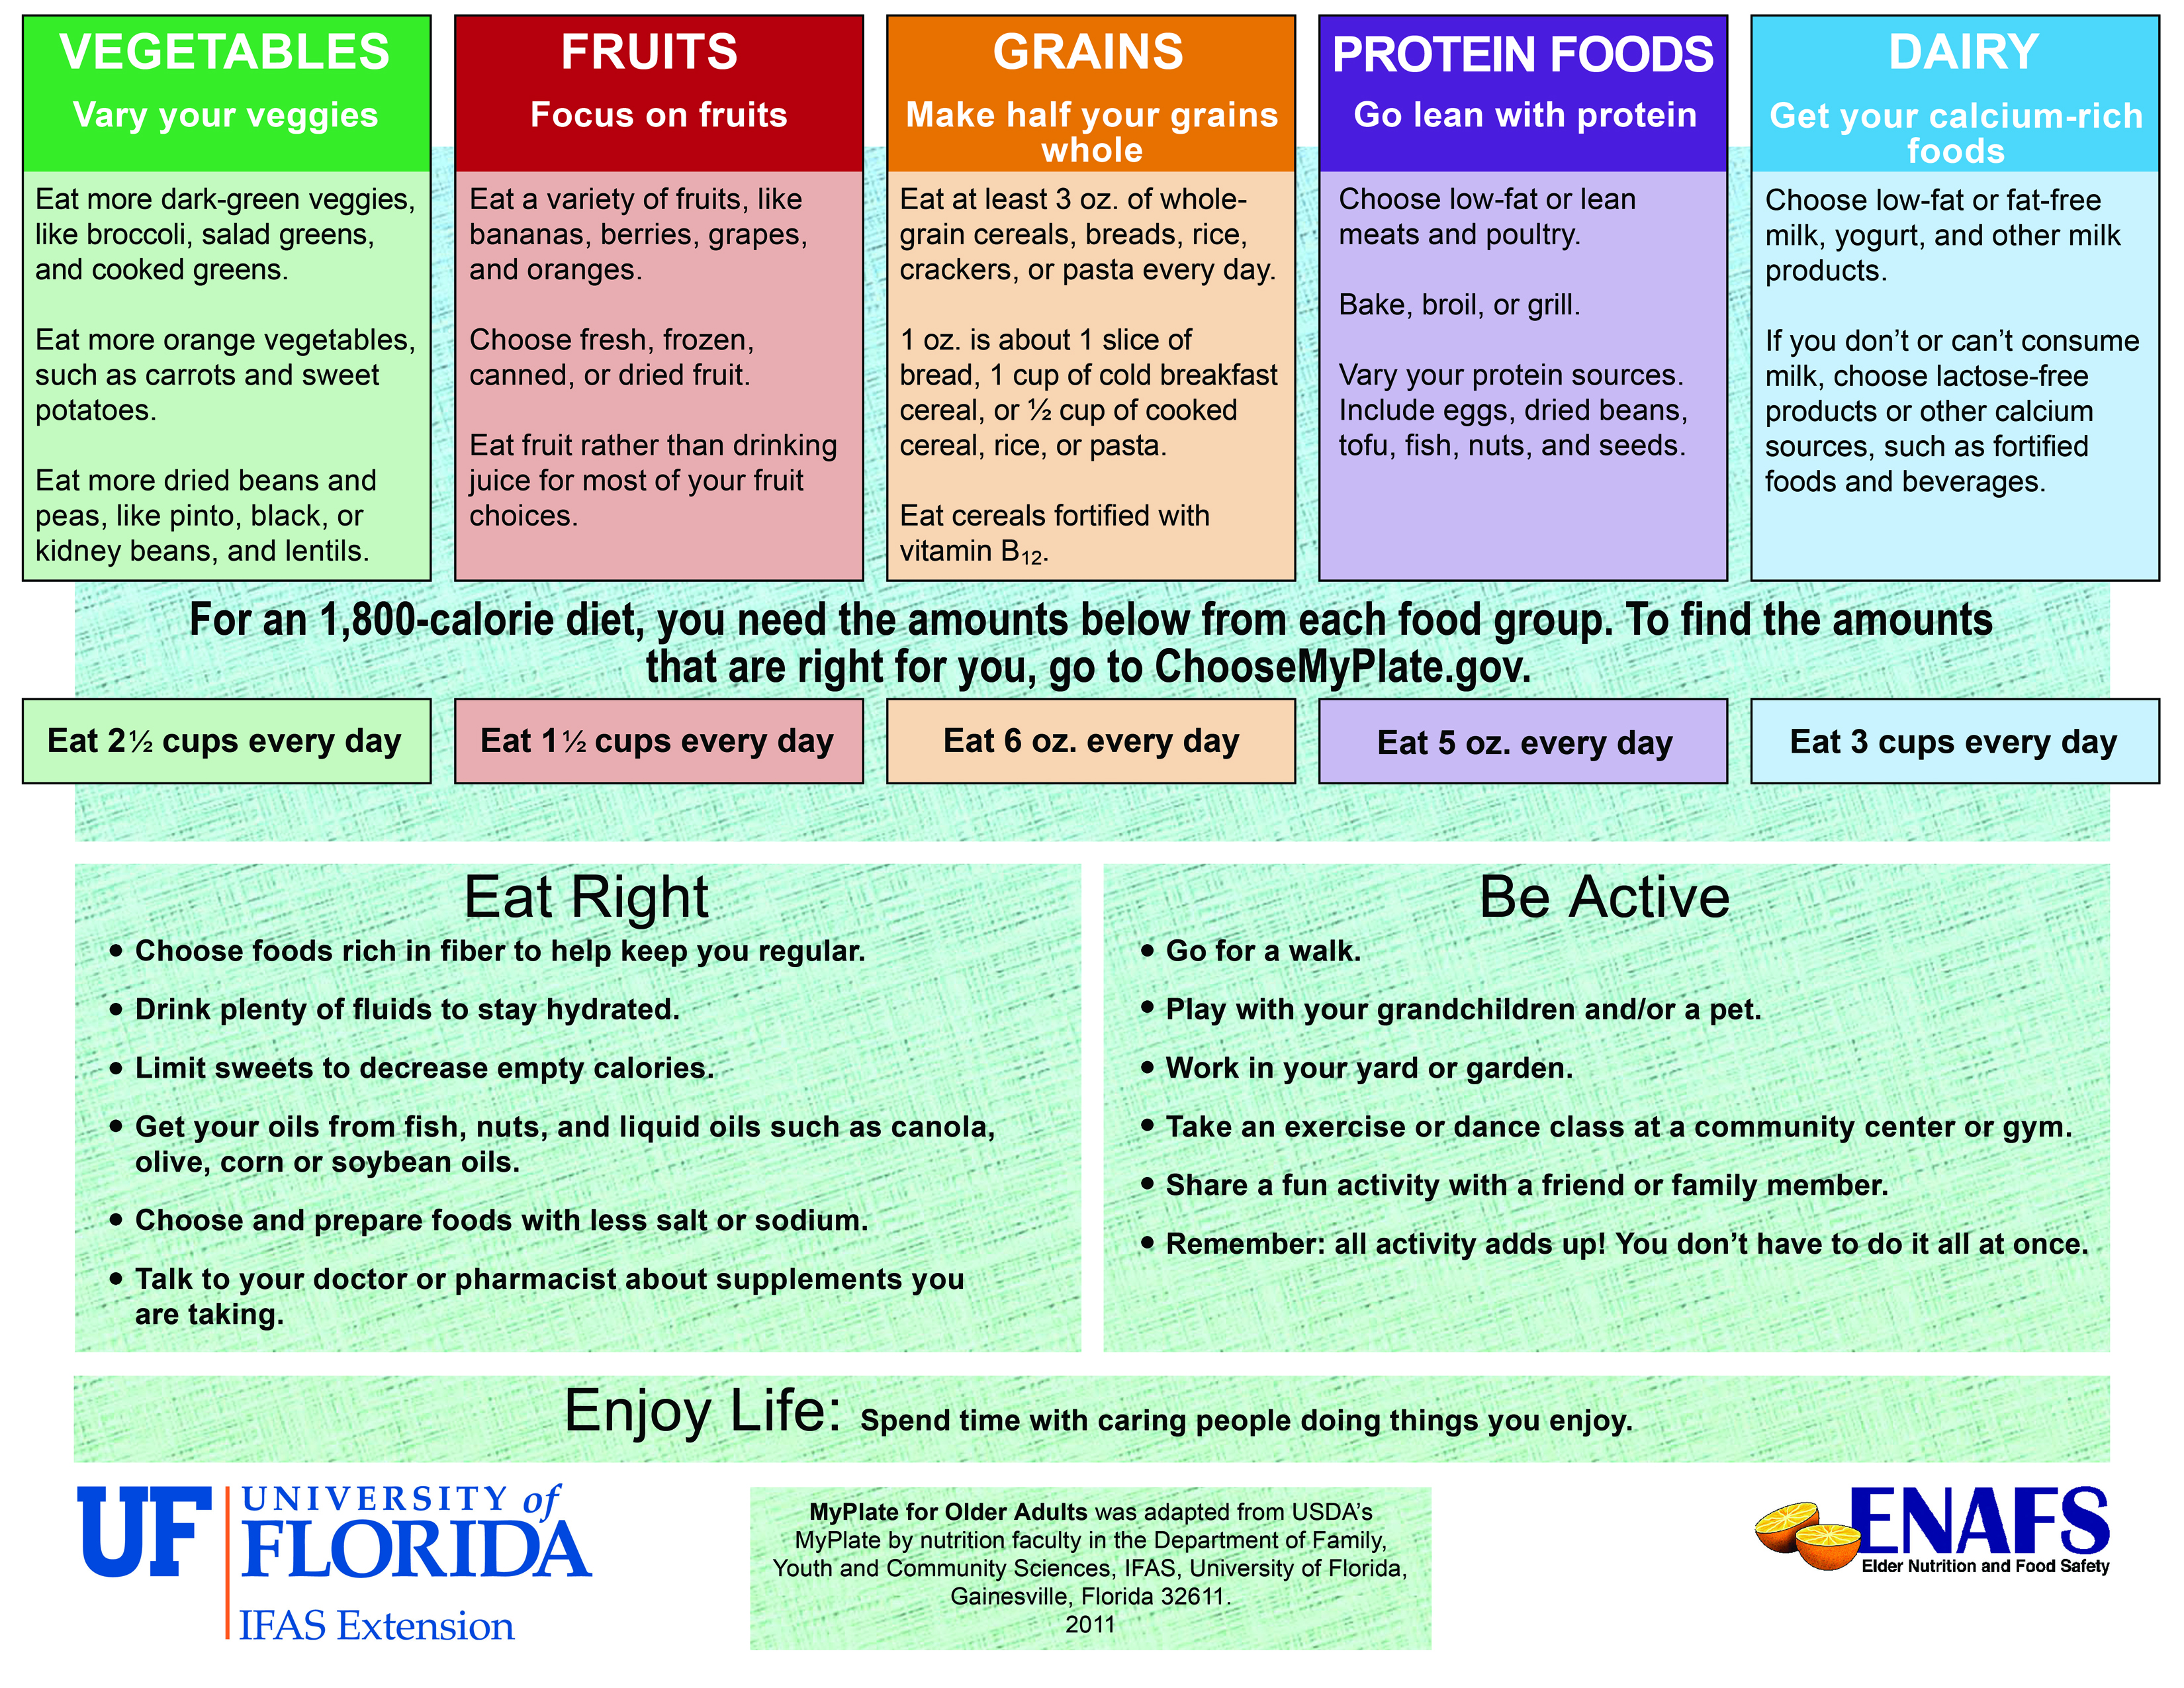 MyPlate for Older Adults from Florida Cooperative Extension, pdf found here.